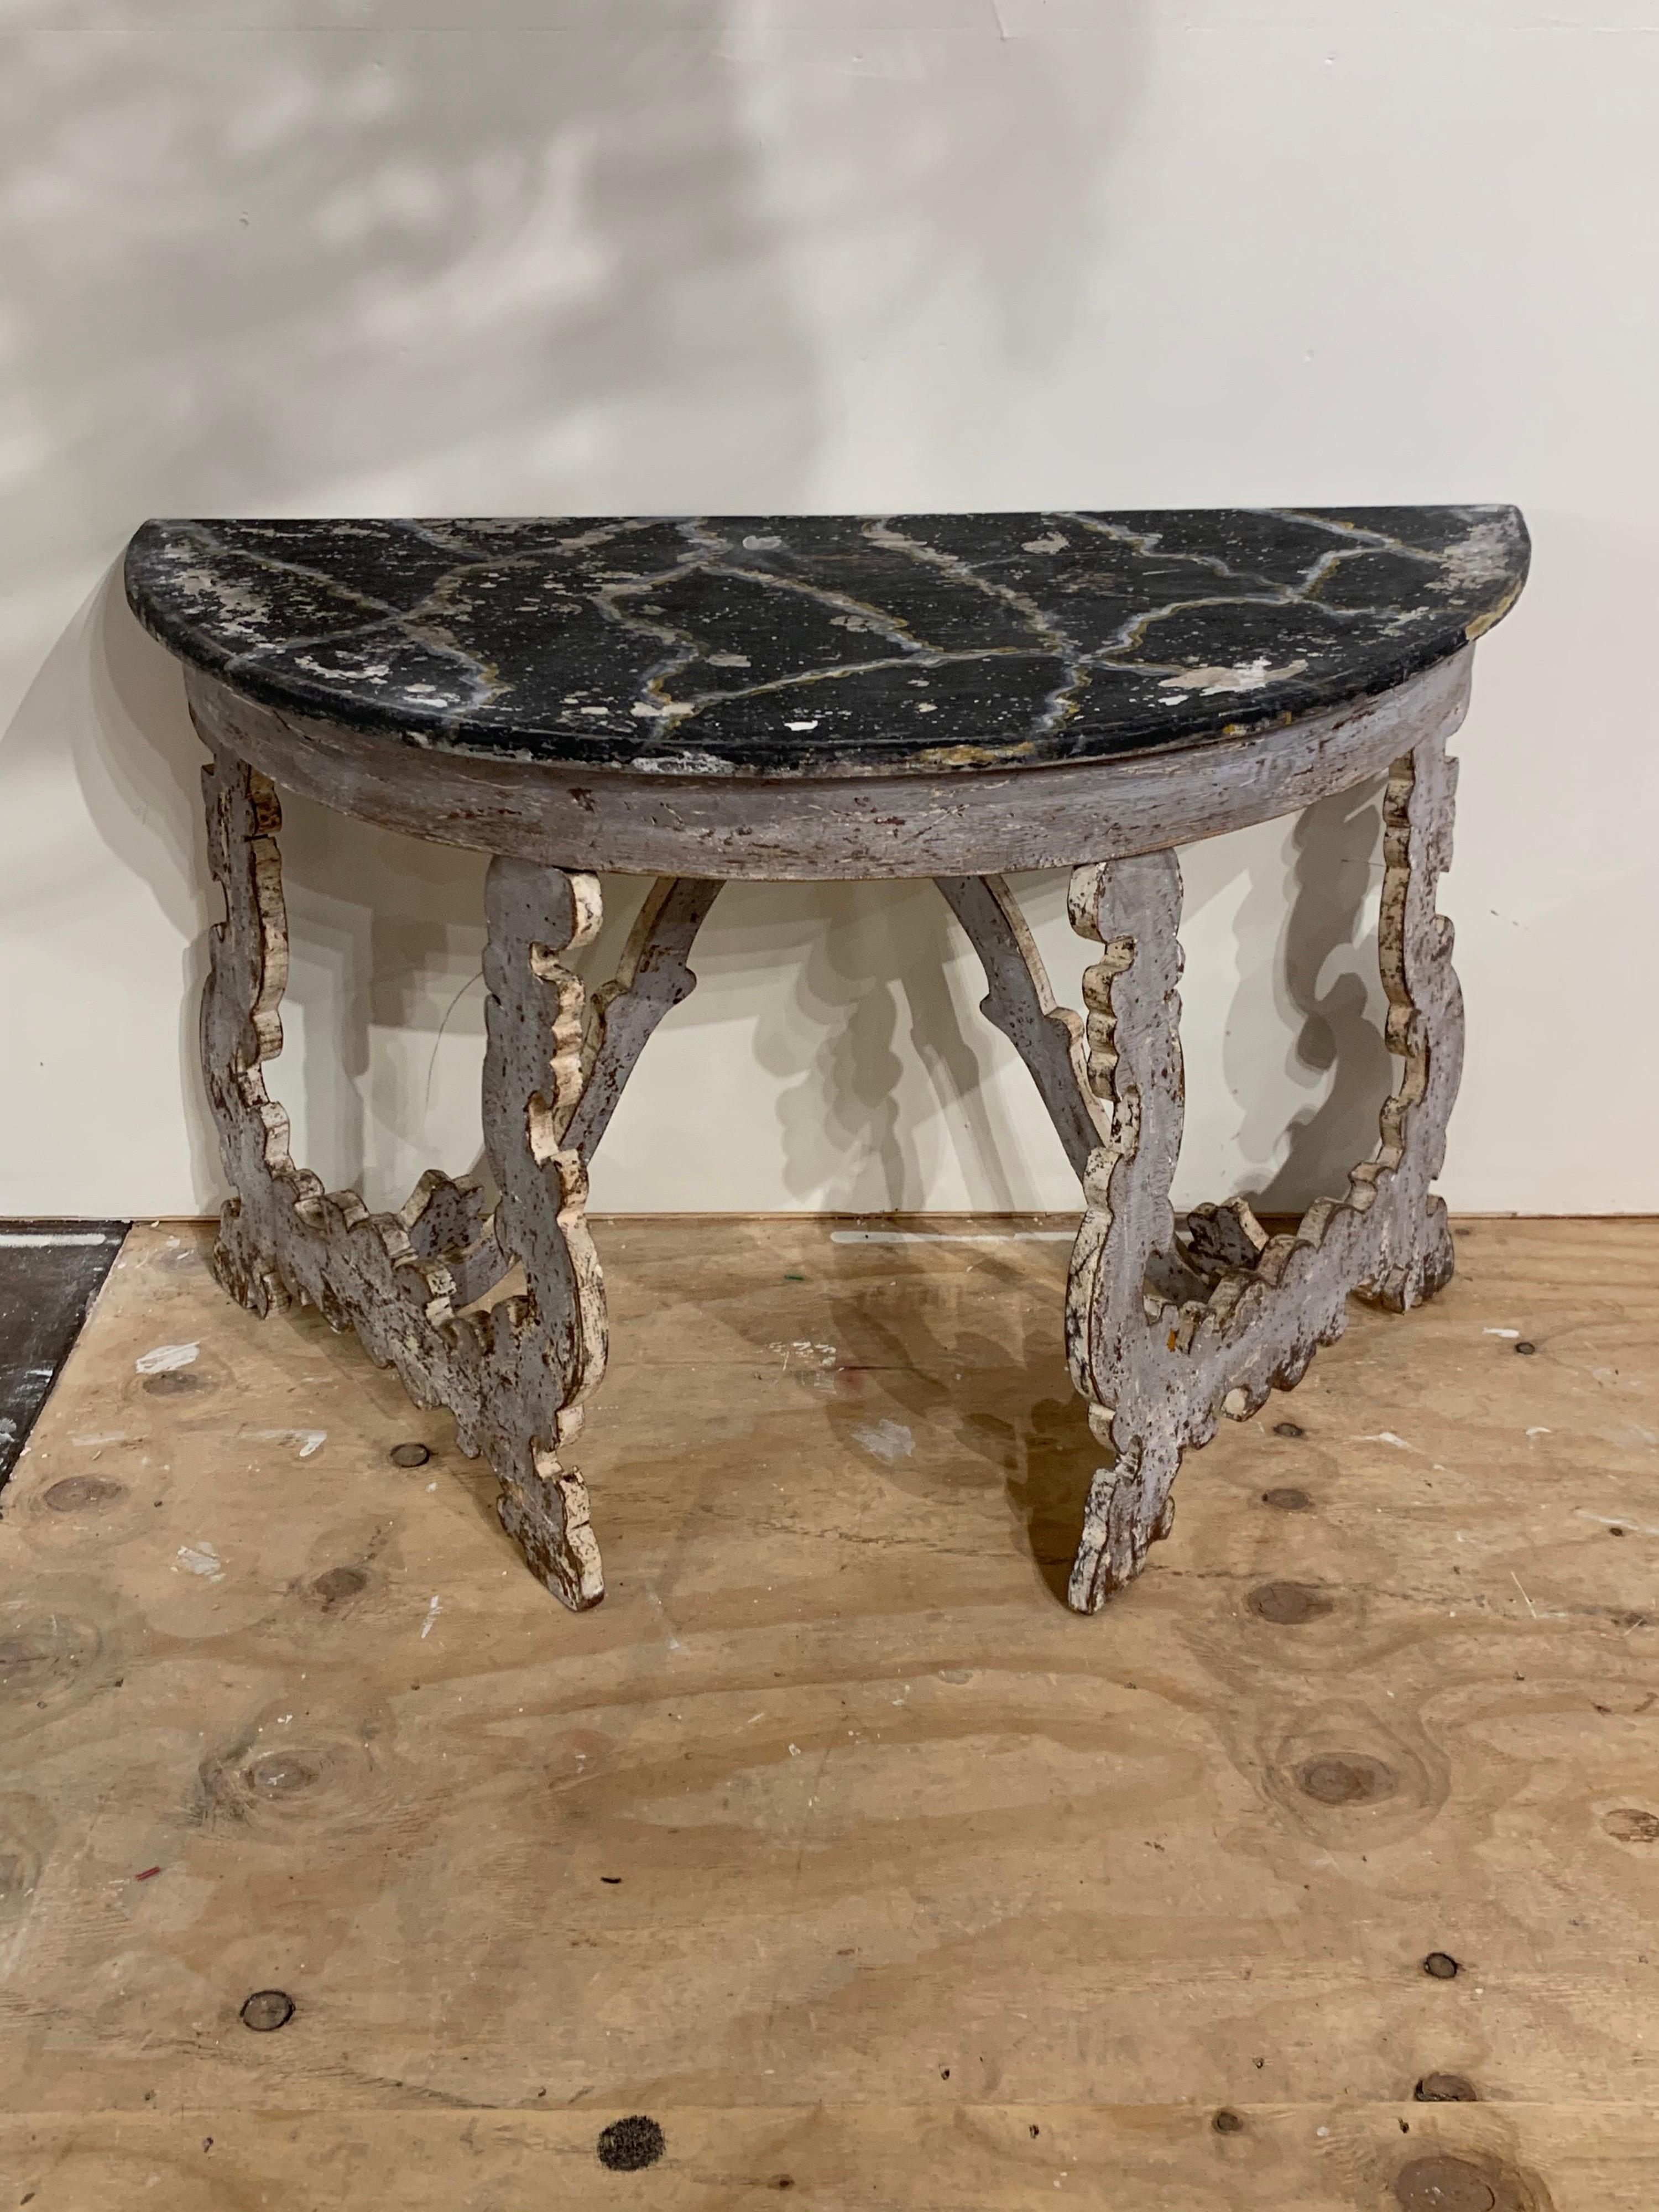 Interesting pair of Italian painted demilune consoles. Scrolling carved shape on the legs and decorative painted pattern on the tops. Makes a stylish statement! Note: Price listed is for one.